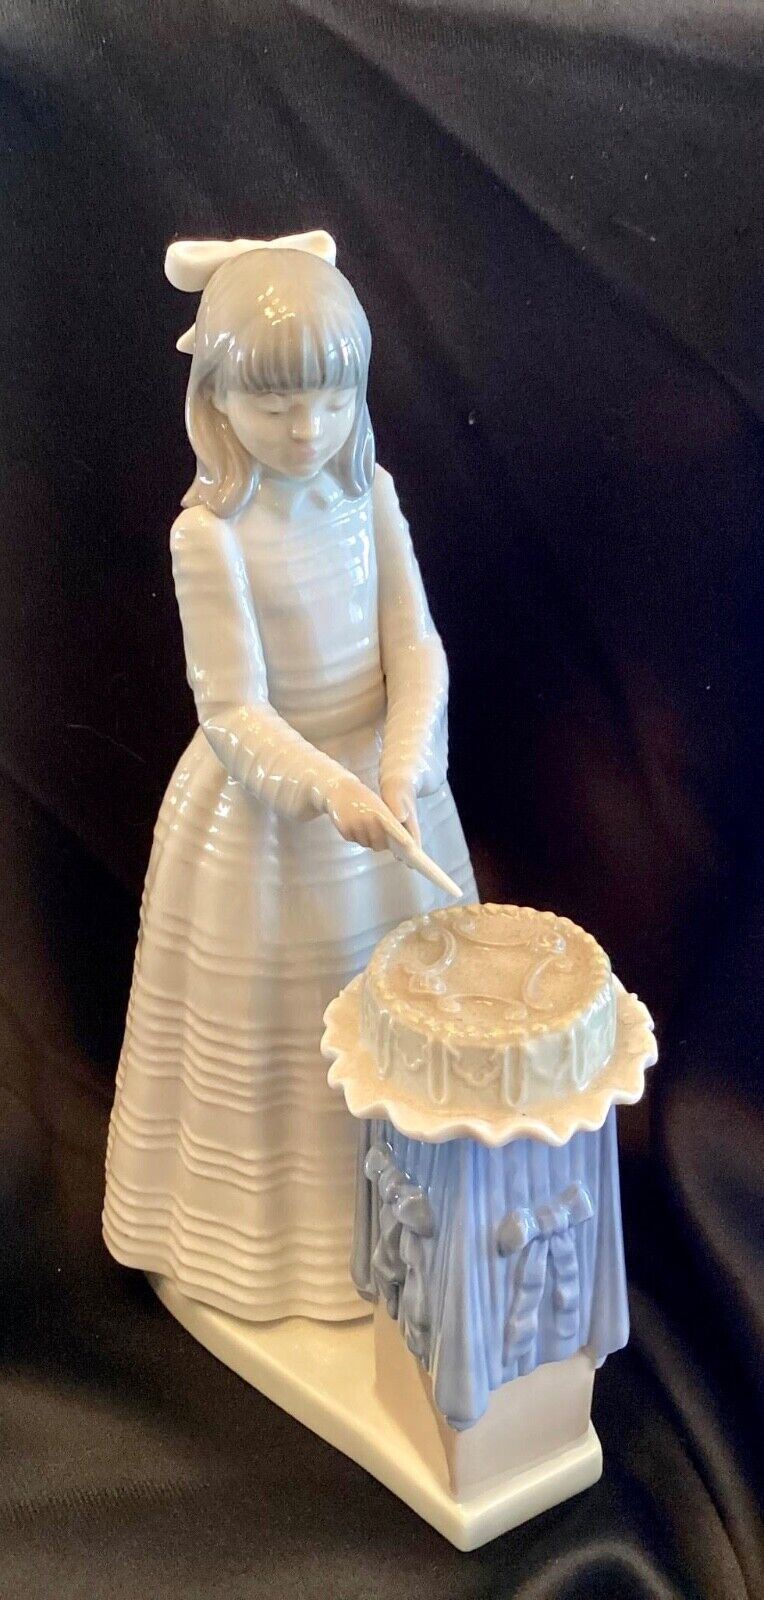 SPECIAL PRICE Lladro 1988 GIRL CUTTING CAKE 8.5